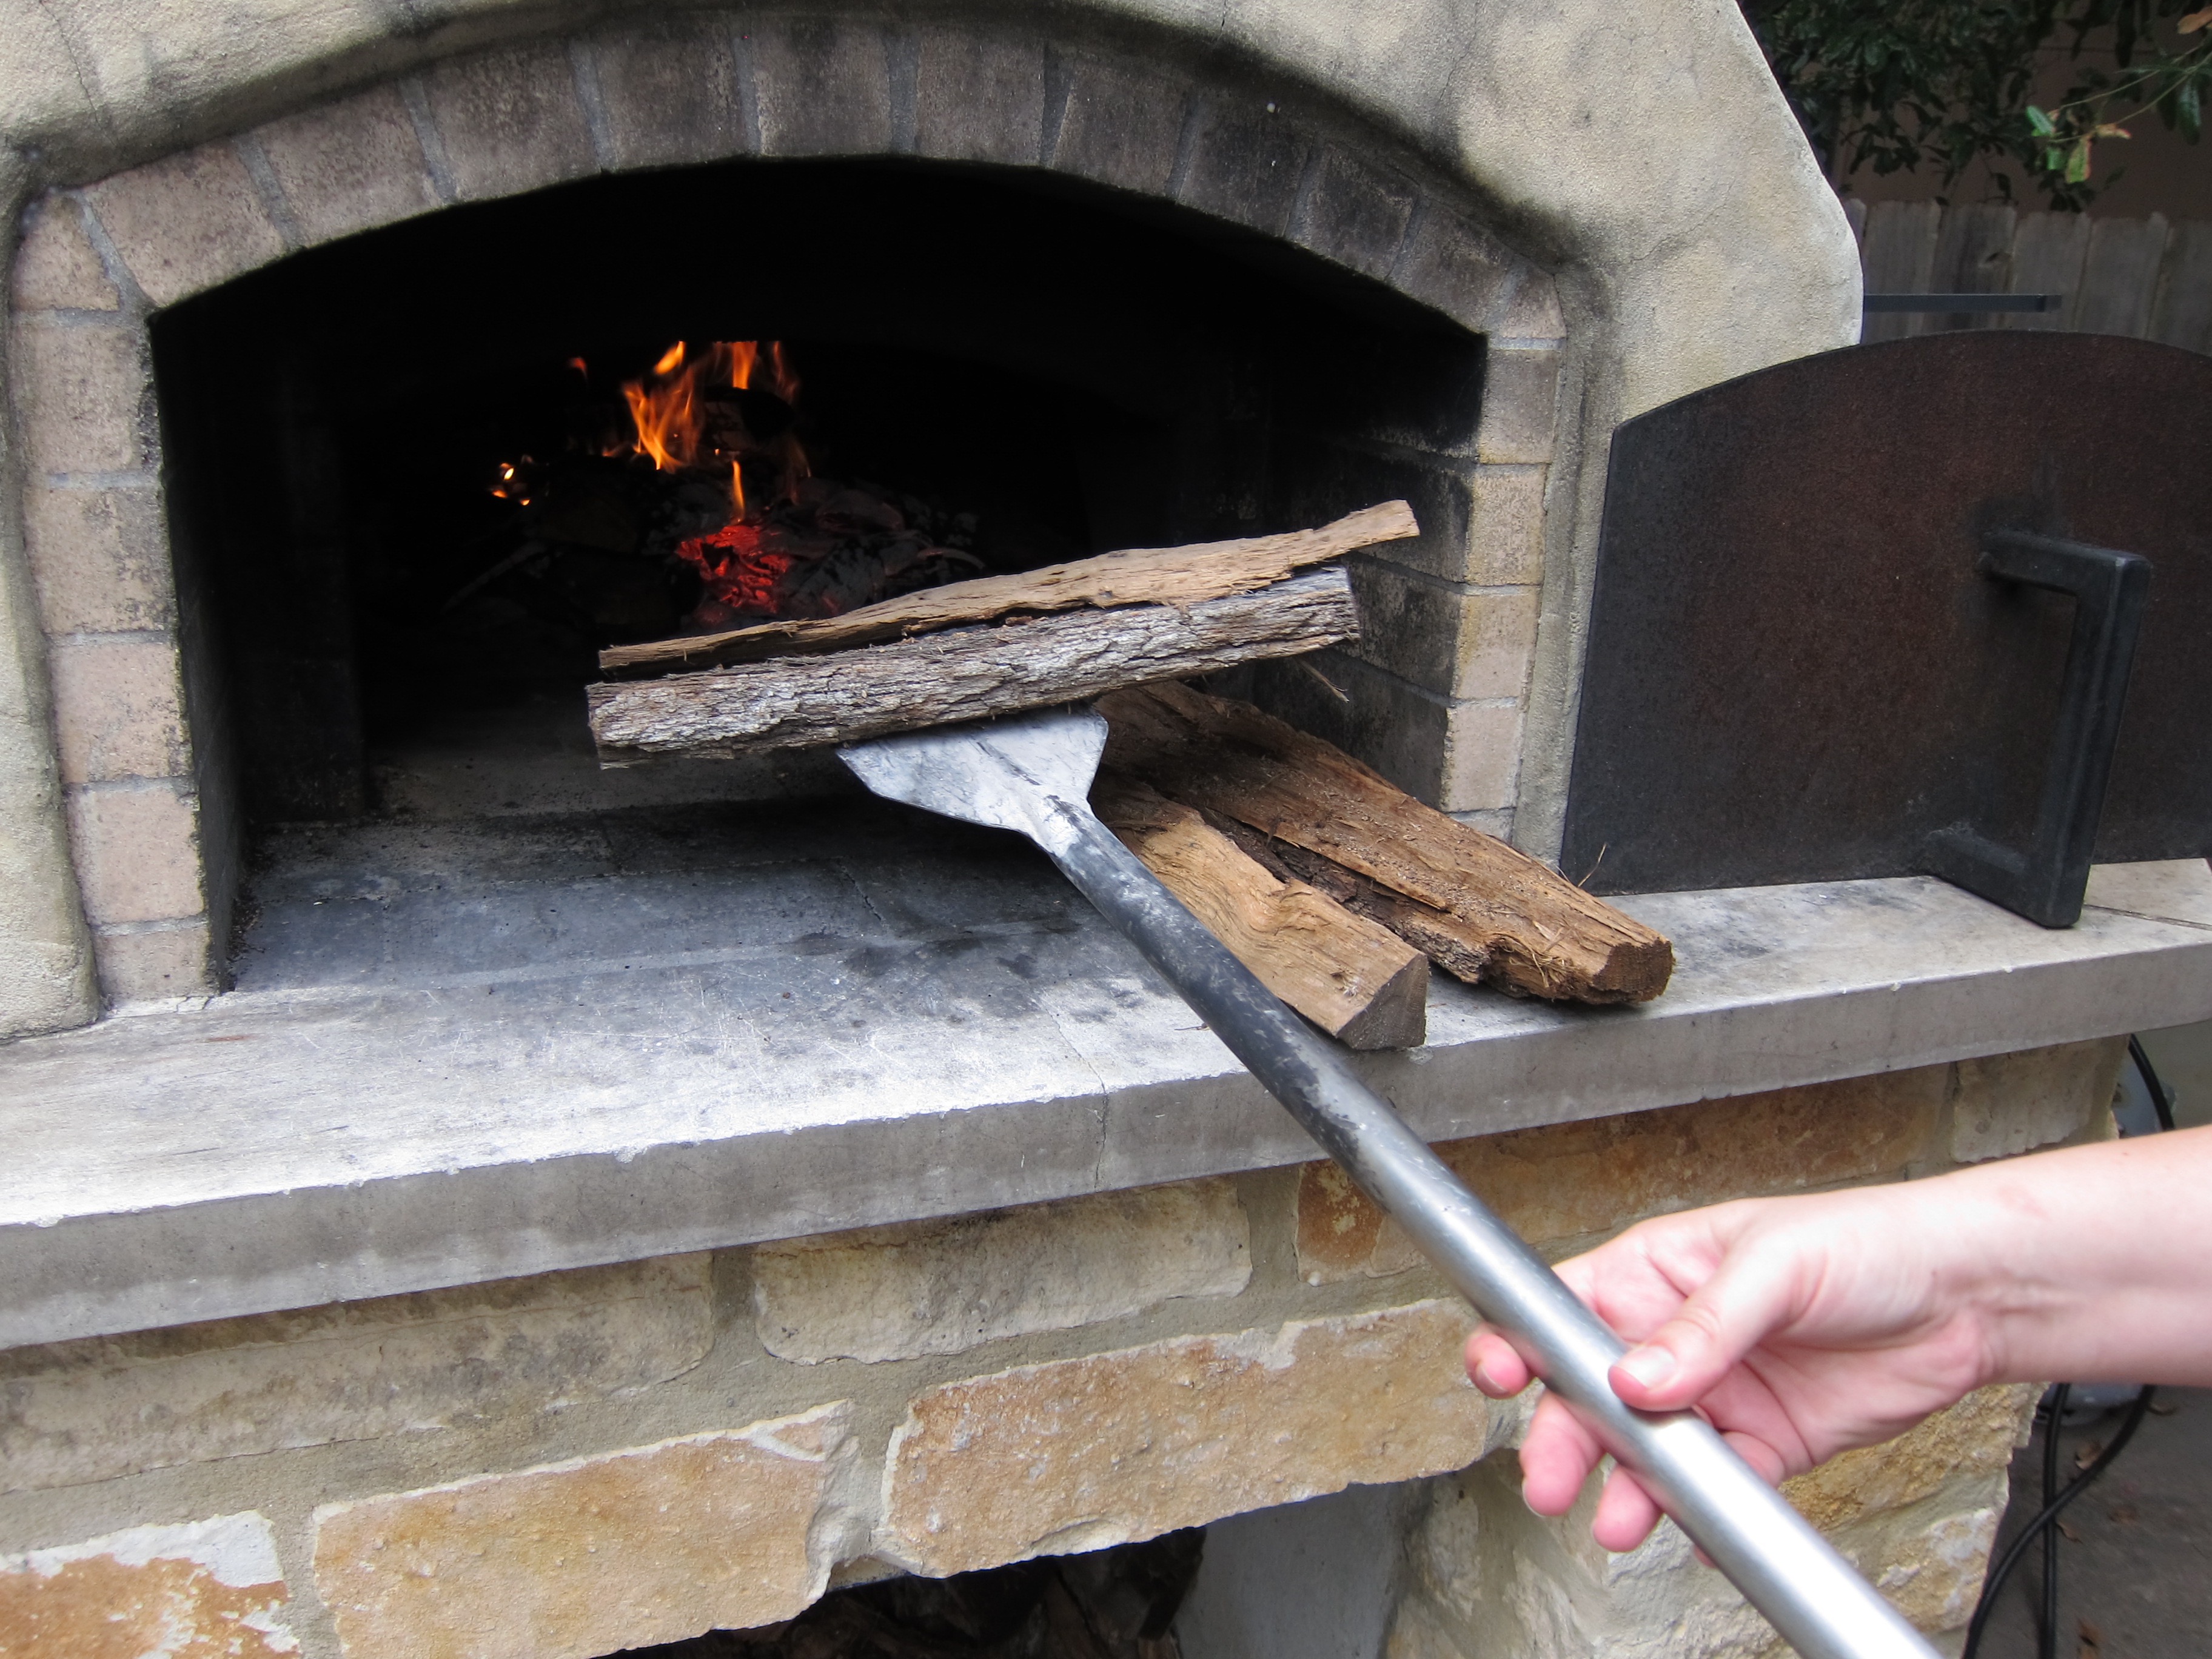 http://texasovenco.com/wp-content/uploads/2015/08/pizza-oven-tool-adding-wood-paddle-1153.jpg